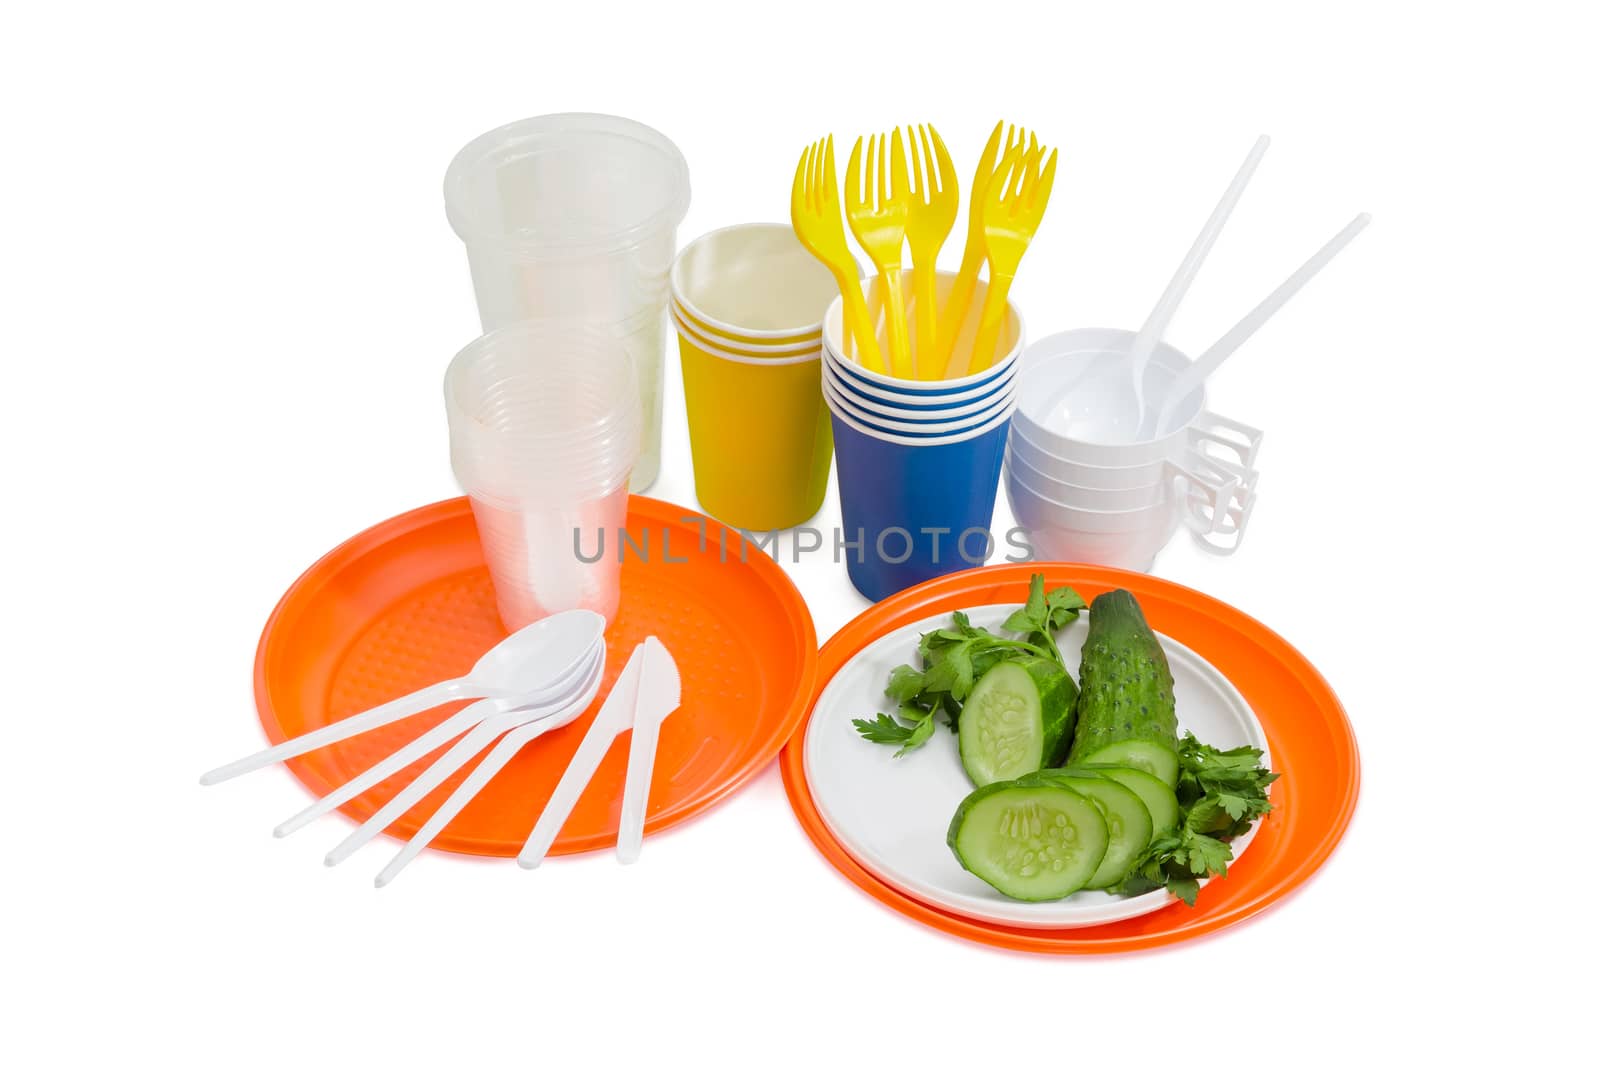 Orange and white disposable plastic plate with whole and sliced cucumber, disposable forks, spoons and knifes, paper and different plastic disposable cups beside on a light background
